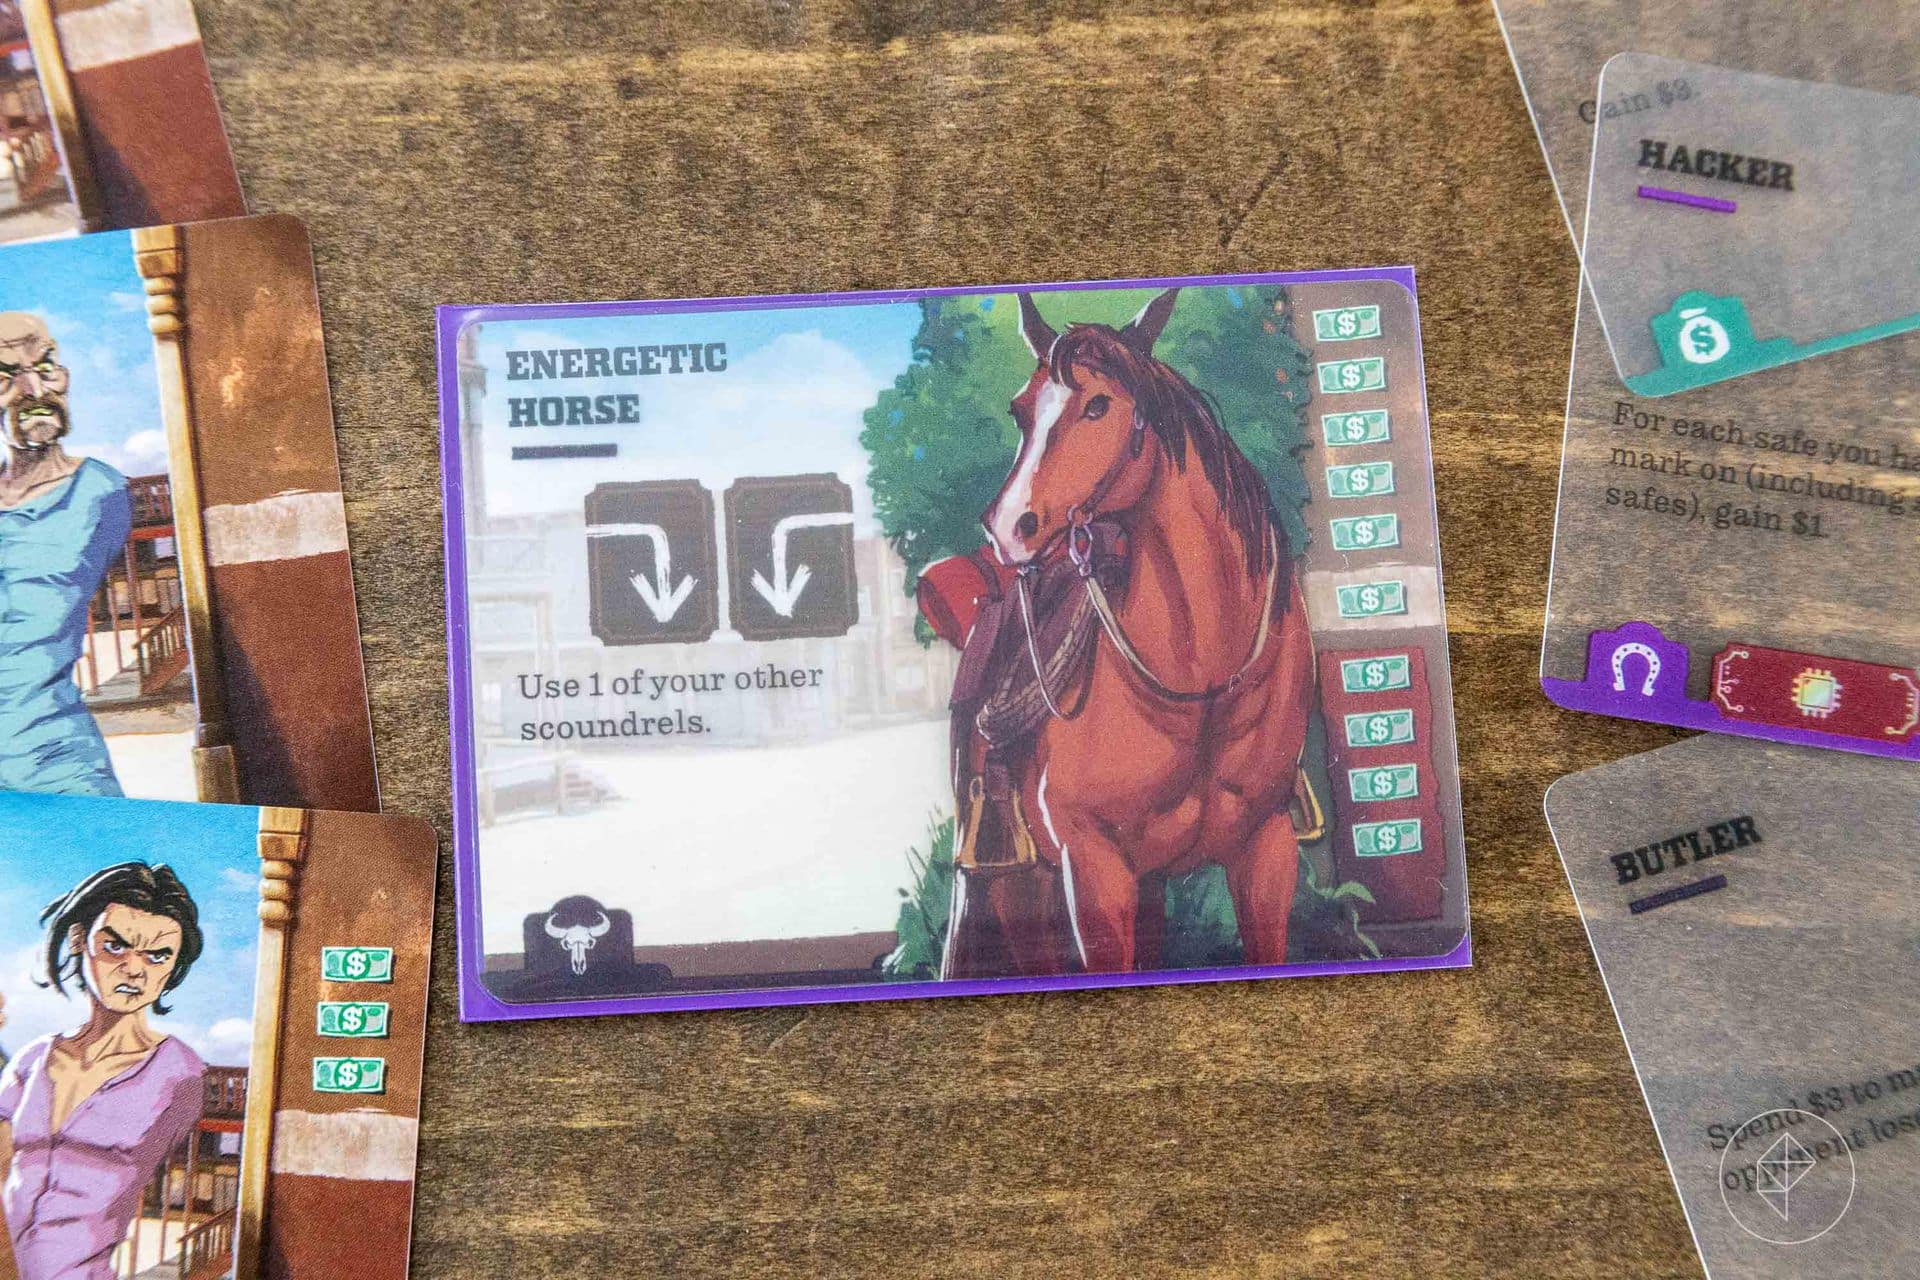 A horse overlay turns a human into a horse.